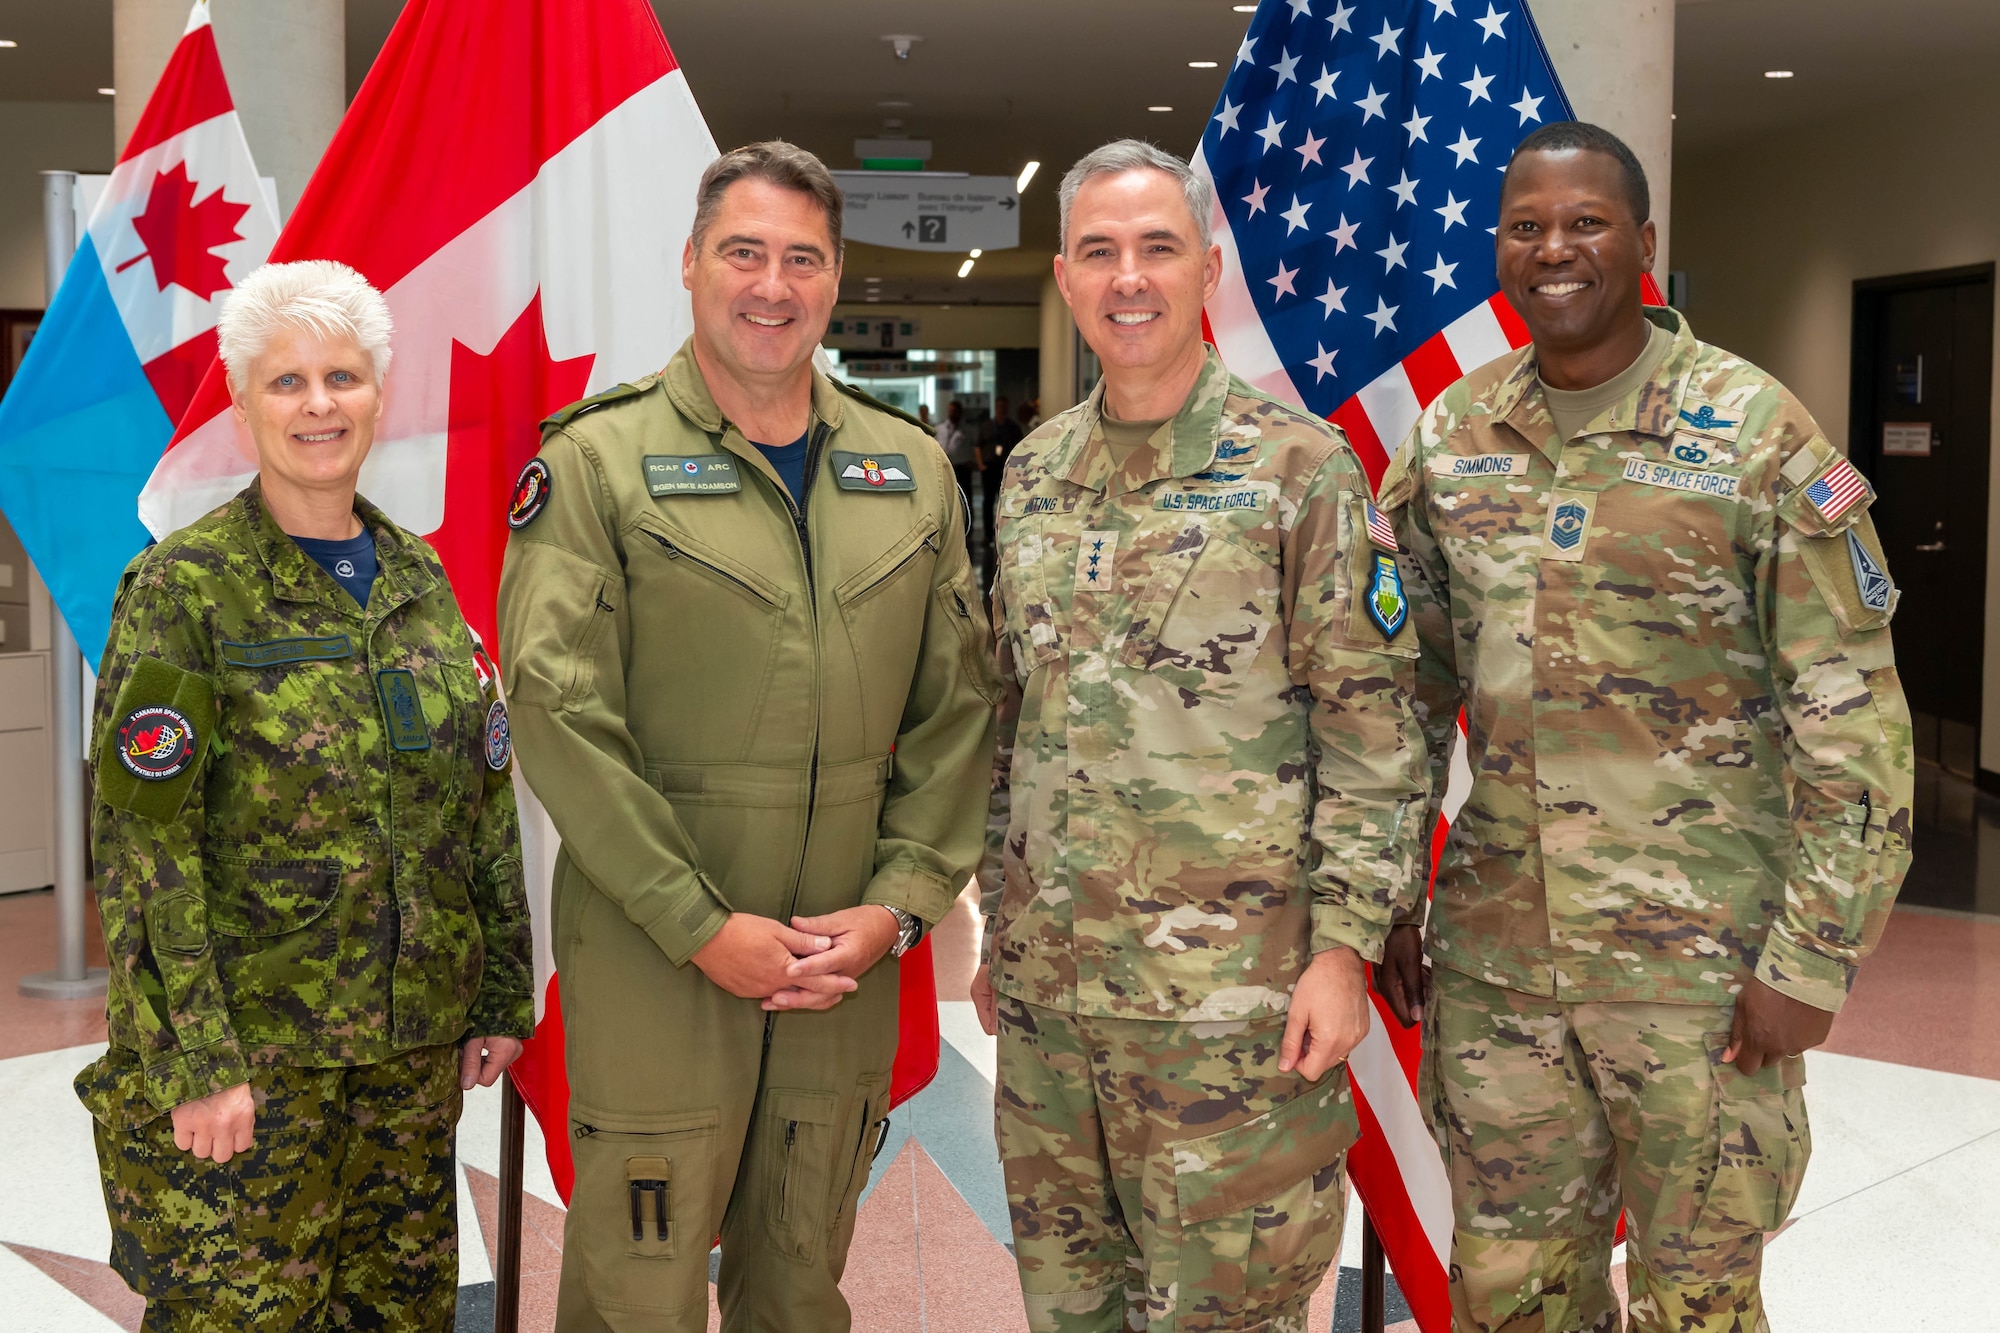 Royal Canadian Air Force Brig Gen G. Michael Adamson, Commander of 3 Canadian Space Division, and CWO Debbie Martens, Chief Warrant Officer of 3 CSD, welcome Lt Gen Stephen Whiting, Space Operations Command commander, and Chief Master Sgt. Jacob Simmons, SpOC Senior Enlisted Leader, to attend meetings at the Canadian National Defence Headquarters, Ottawa, Ont. June 26, 2023. Space is a team sport and our allies and partners are an asymmetrical advantage that our competitors cannot match. (Courtesy photo)